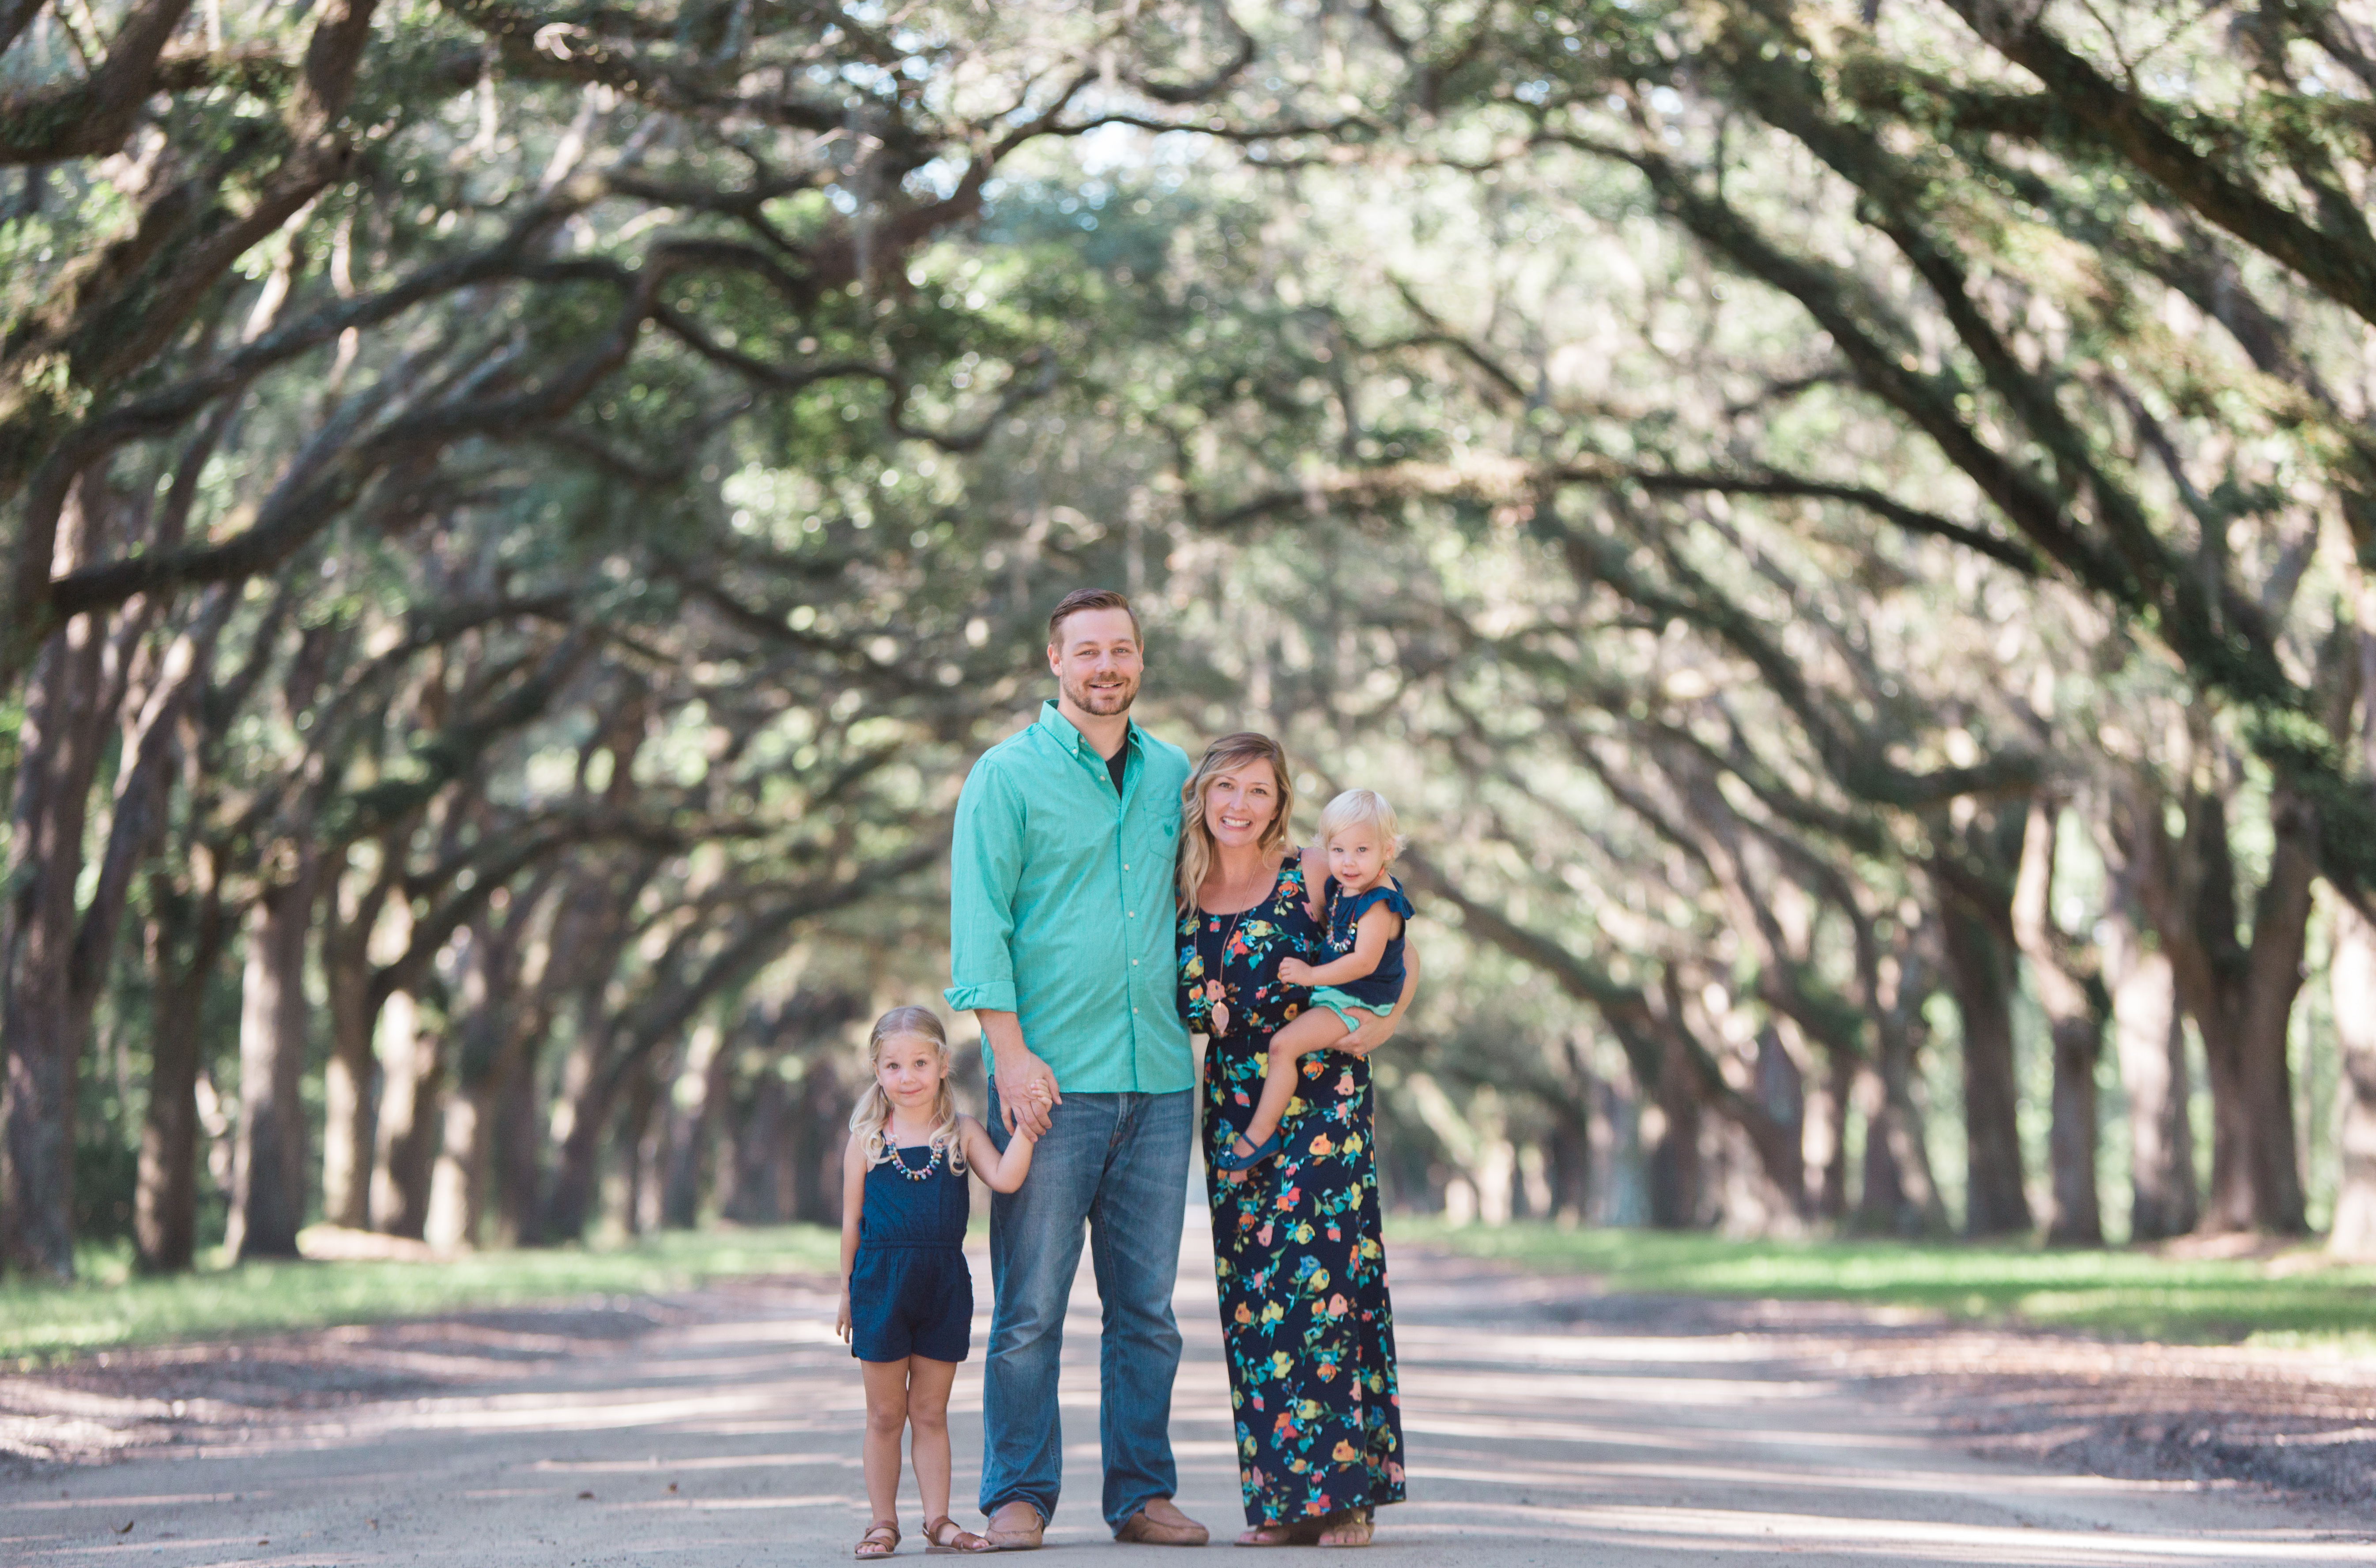 Leigh Wolfe Photography and family in Savannah